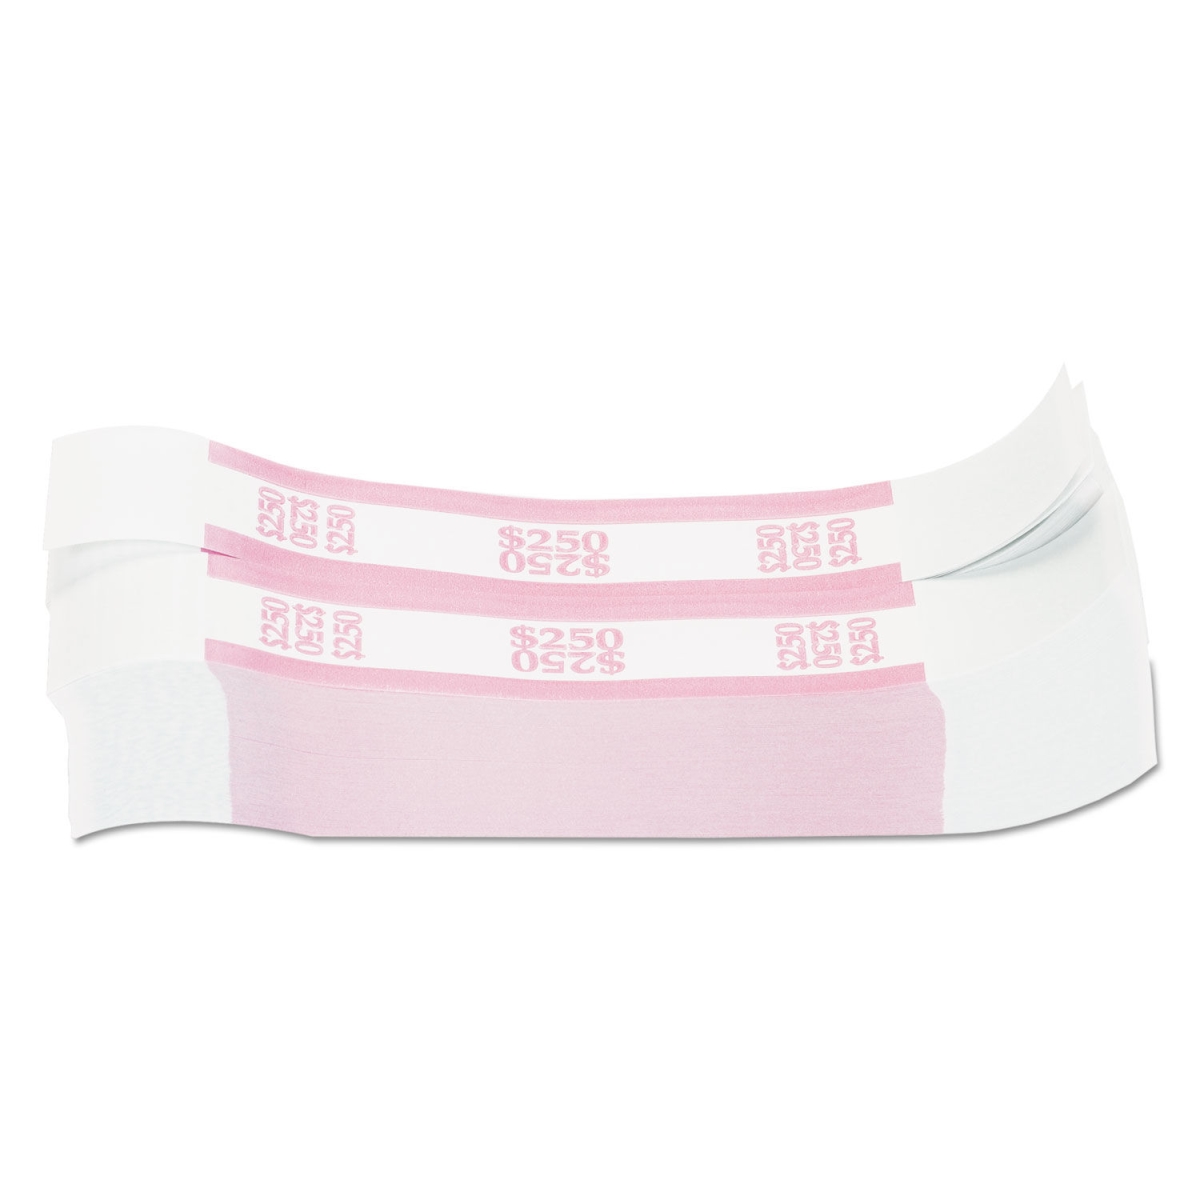 Picture of Pap CTX400250 250 Dollar Bills Currency Strap, Pink - Pack of 250